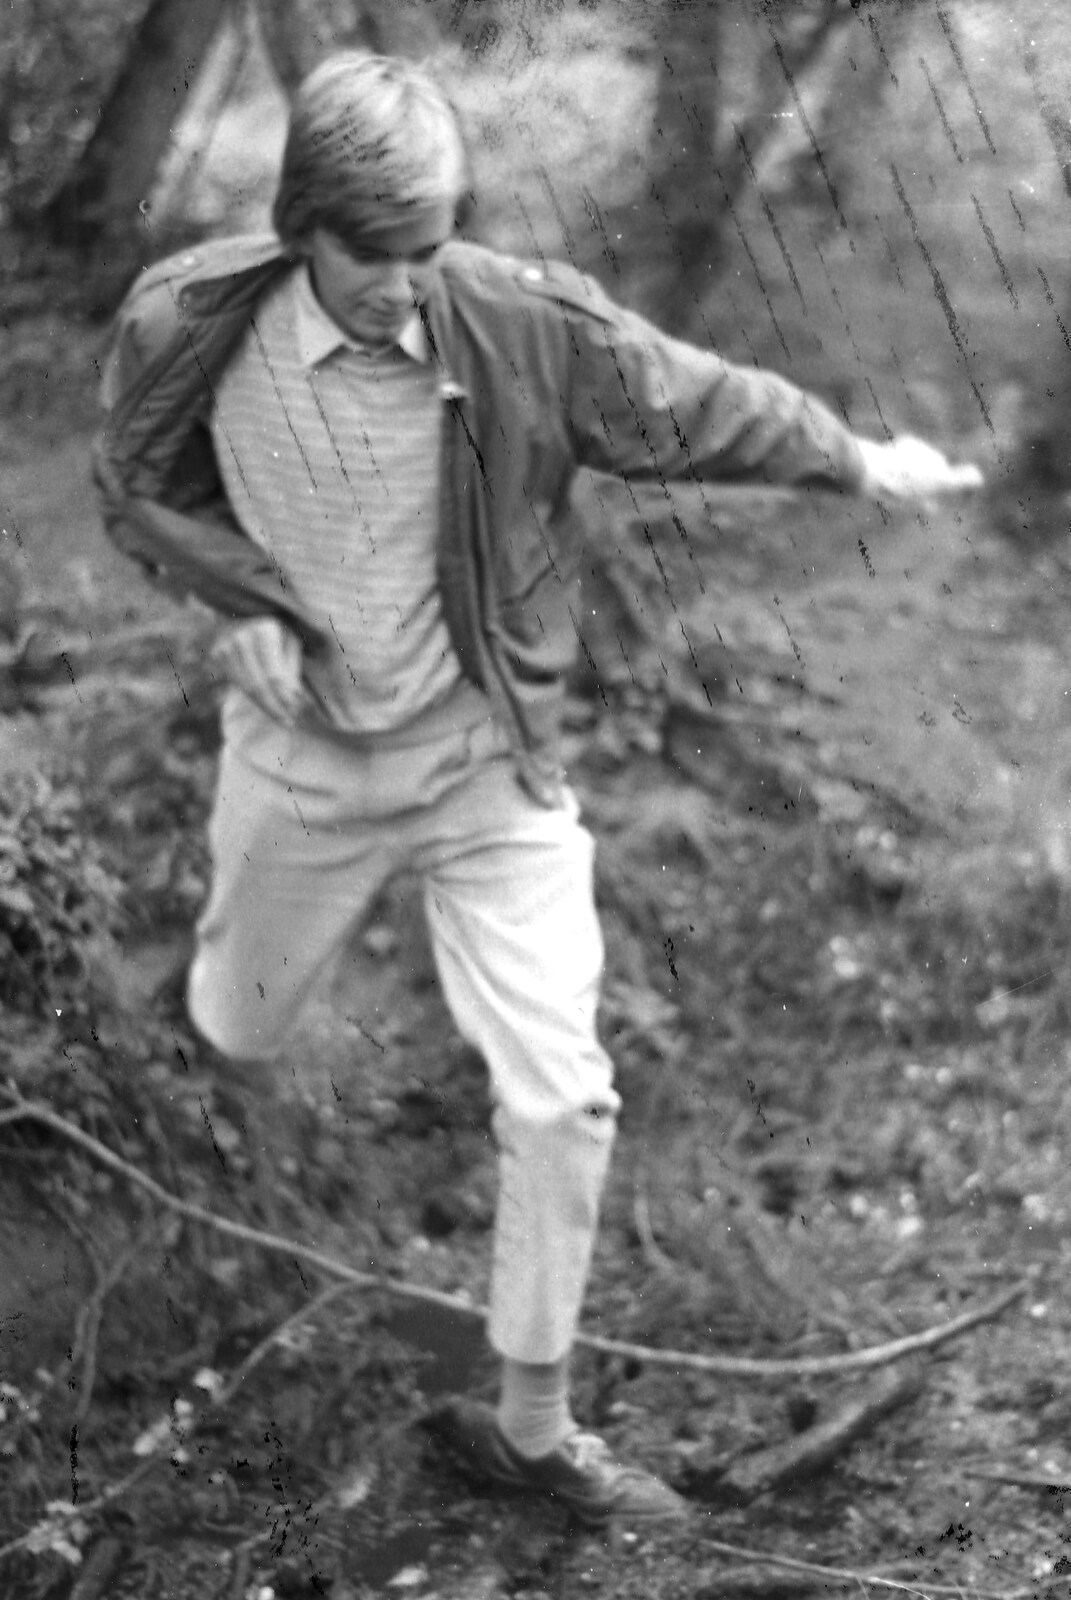 Nosher jumps around at Wootton Bridge from The New Forest Marathon and Other Randomness, New Milton, Hampshire - 15th September 1985